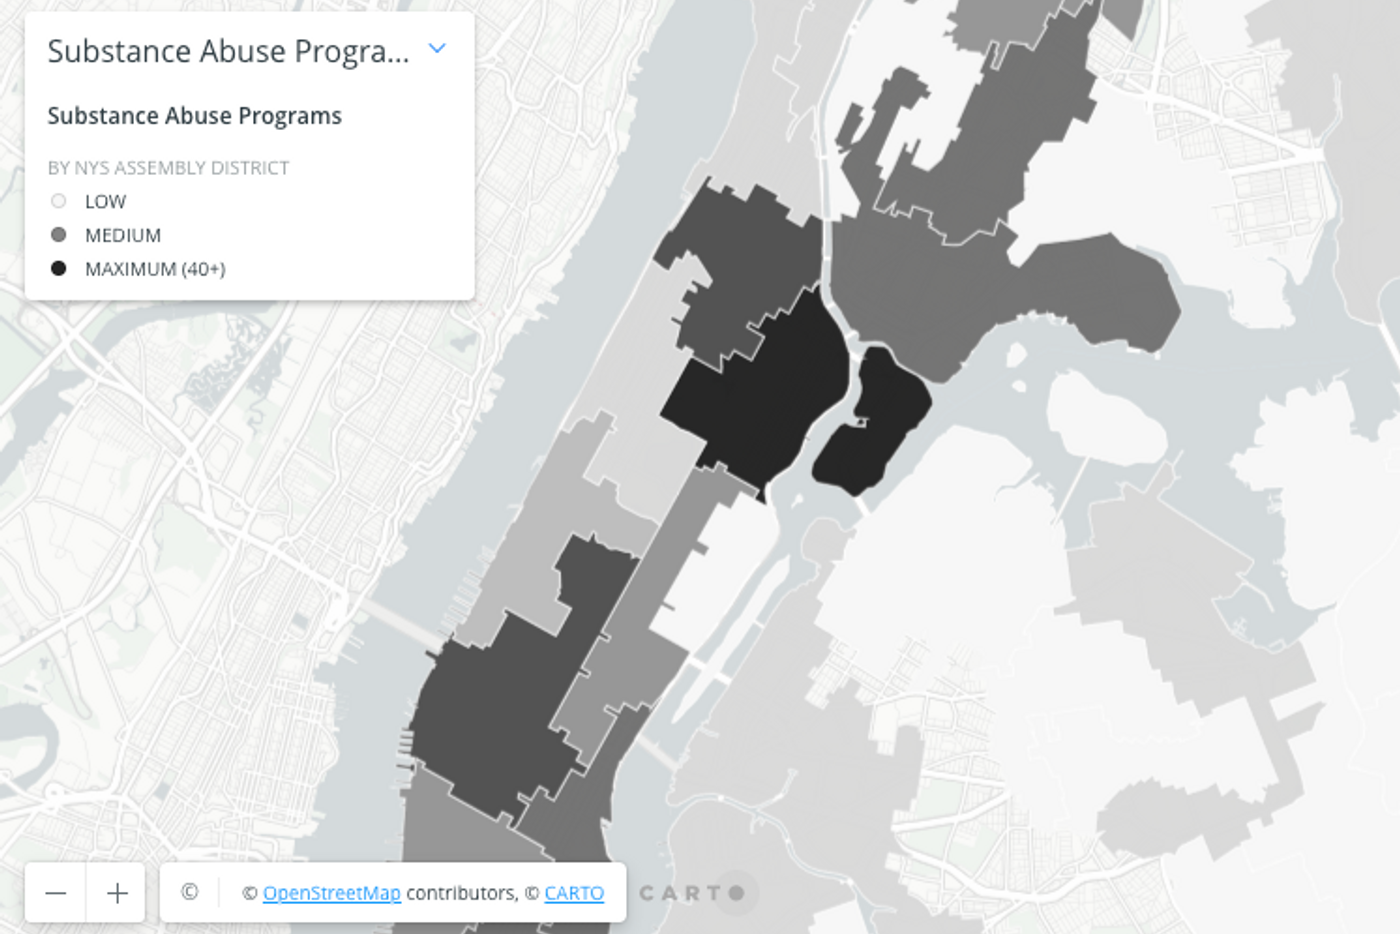 Screenshot of map put out by the Greater Harlem Coalition showing density of substance abuse programs in Manhattan.